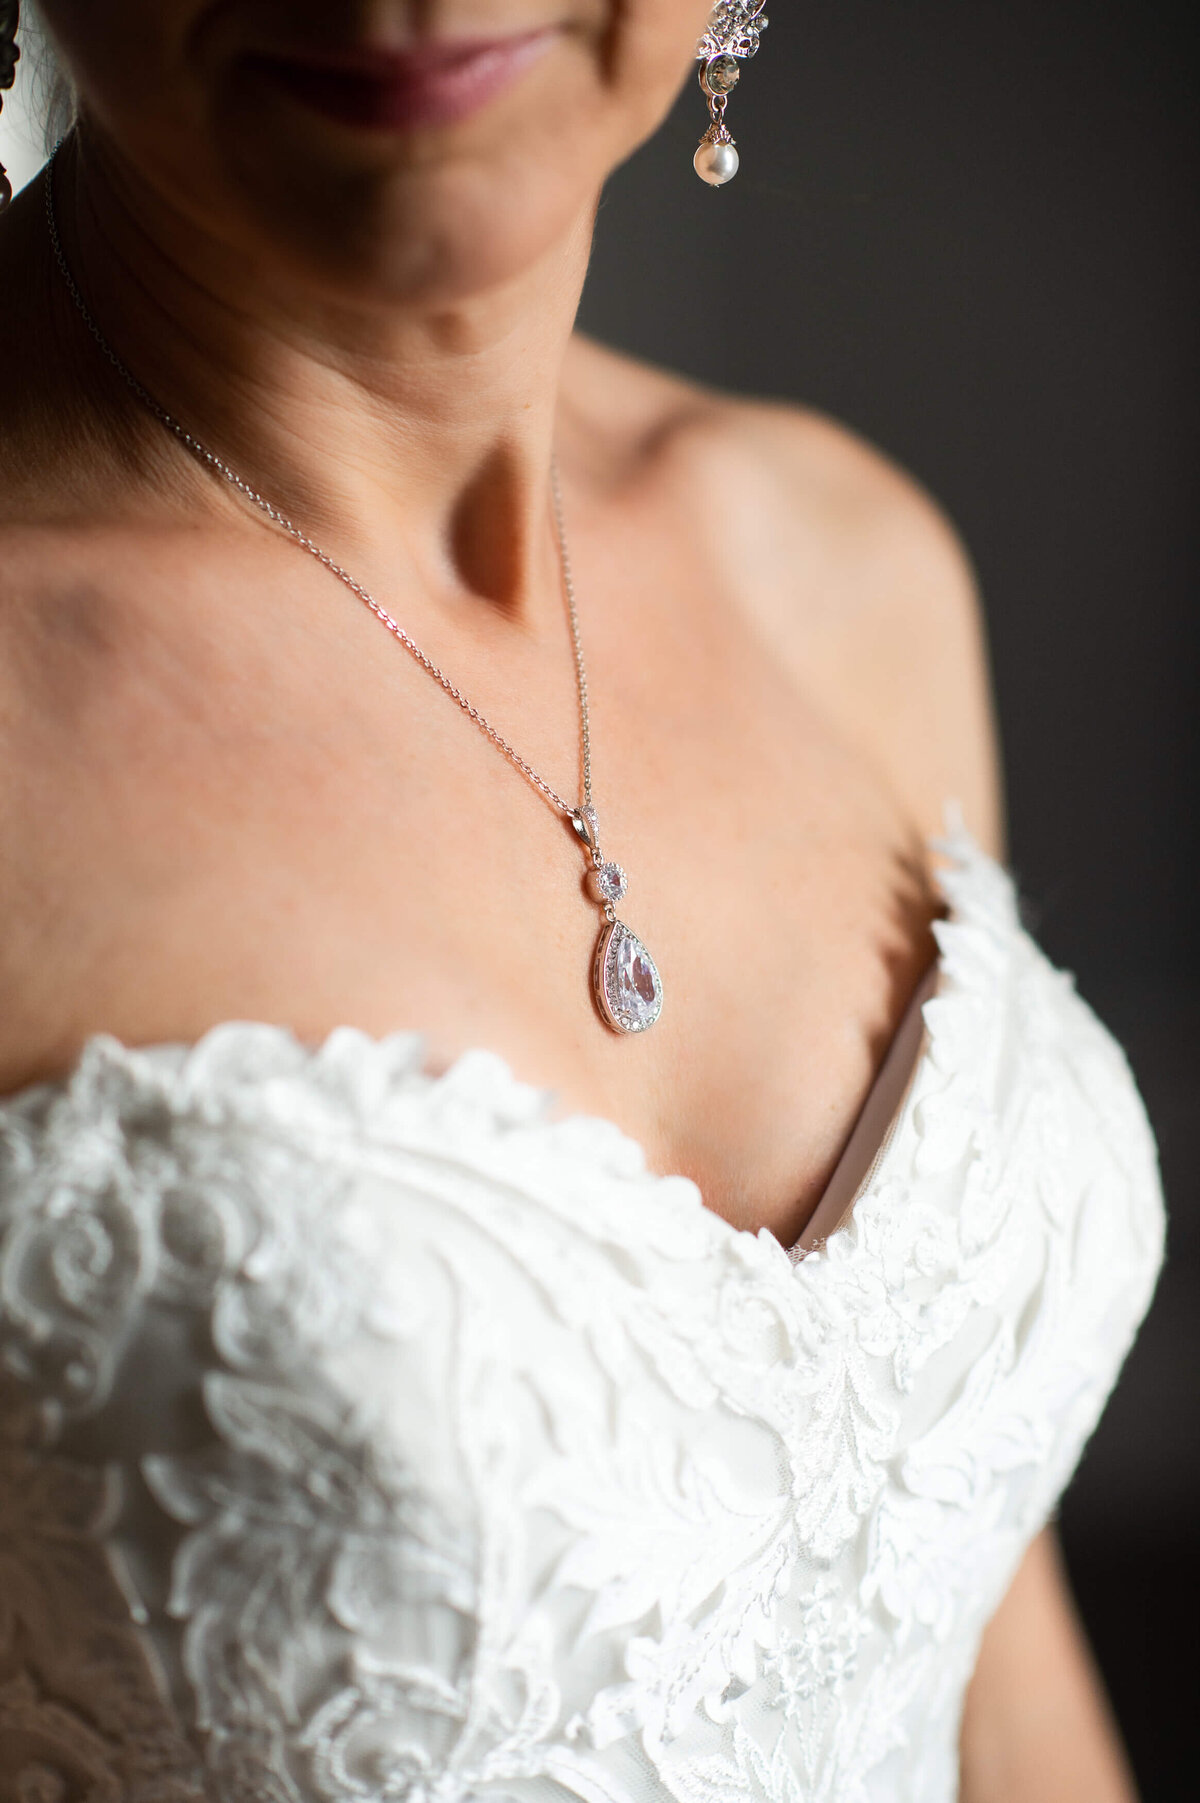 Ottawa wedding photography showing the intricate applique details of the bride's wedding gown and necklace